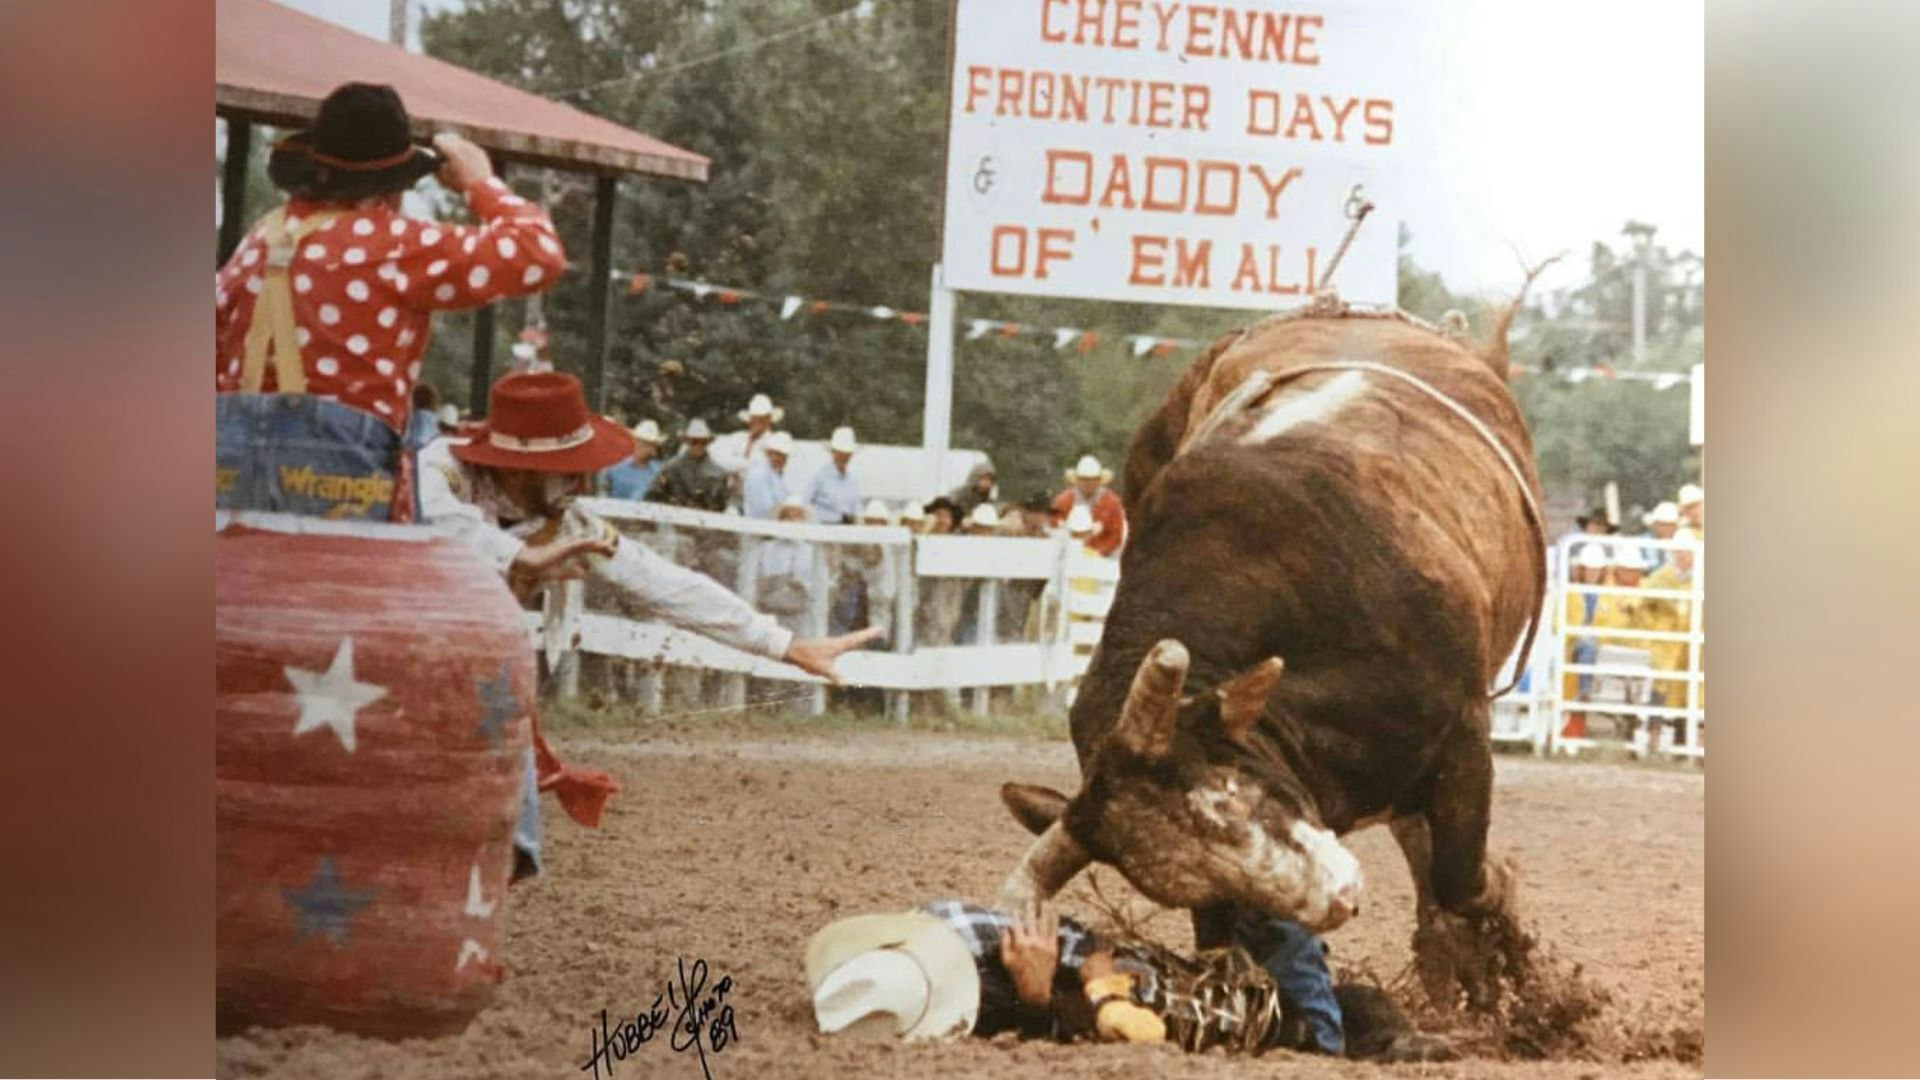 Lane Frost at 1989 Cheyenne Frontier Days when bull Takin' Care of Business struck him after the ride. He was pronounced dead at a local hospital.